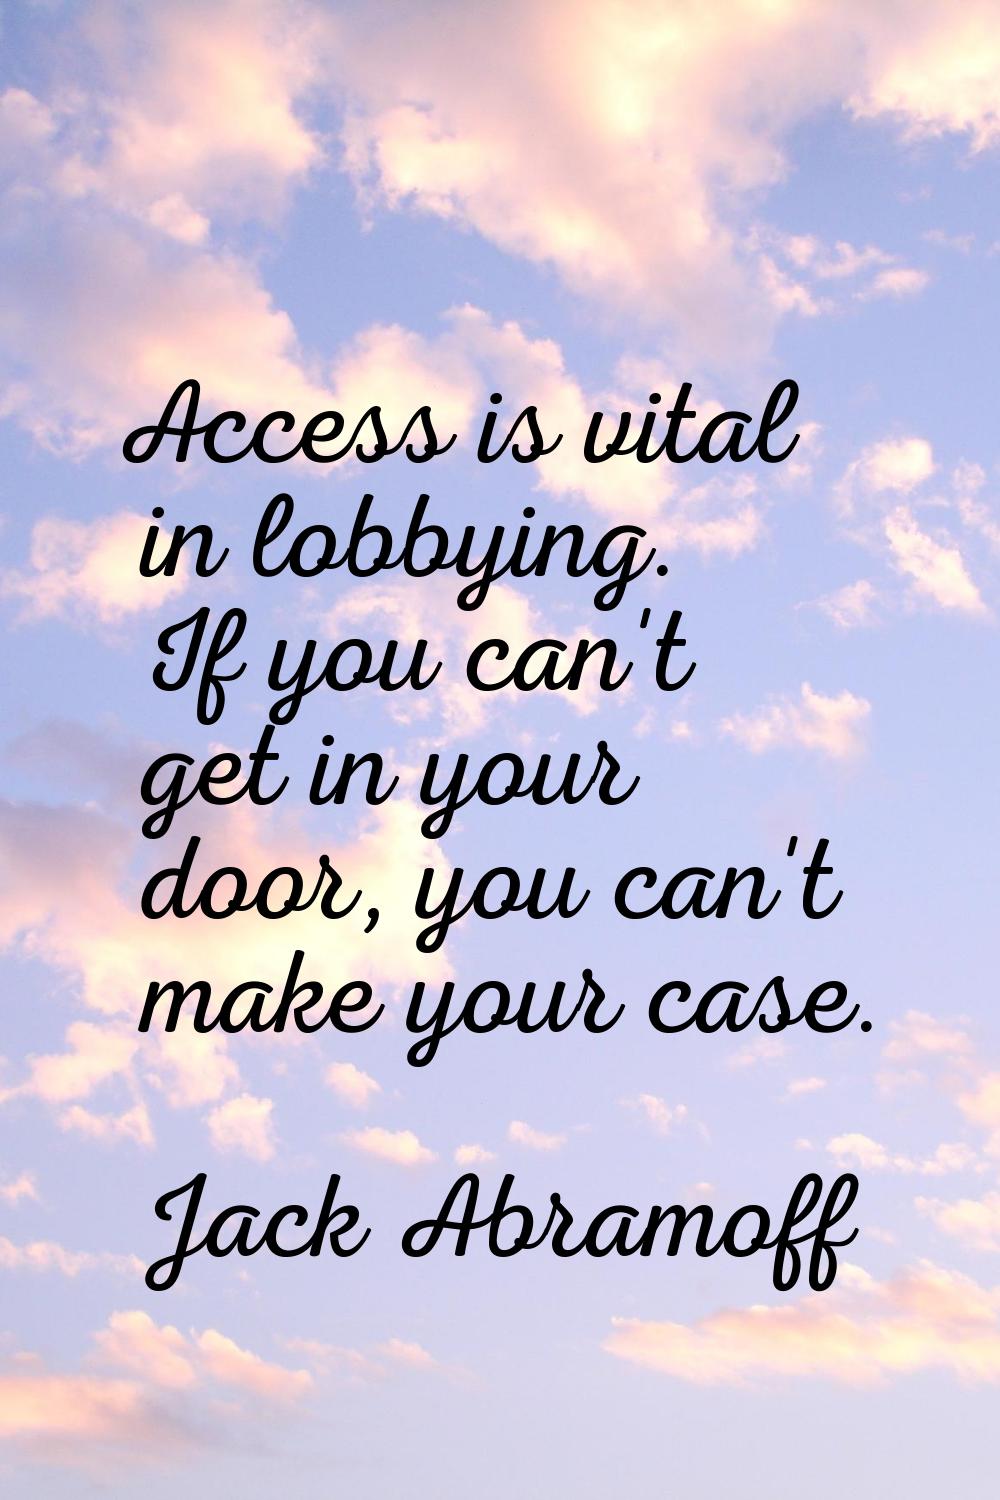 Access is vital in lobbying. If you can't get in your door, you can't make your case.